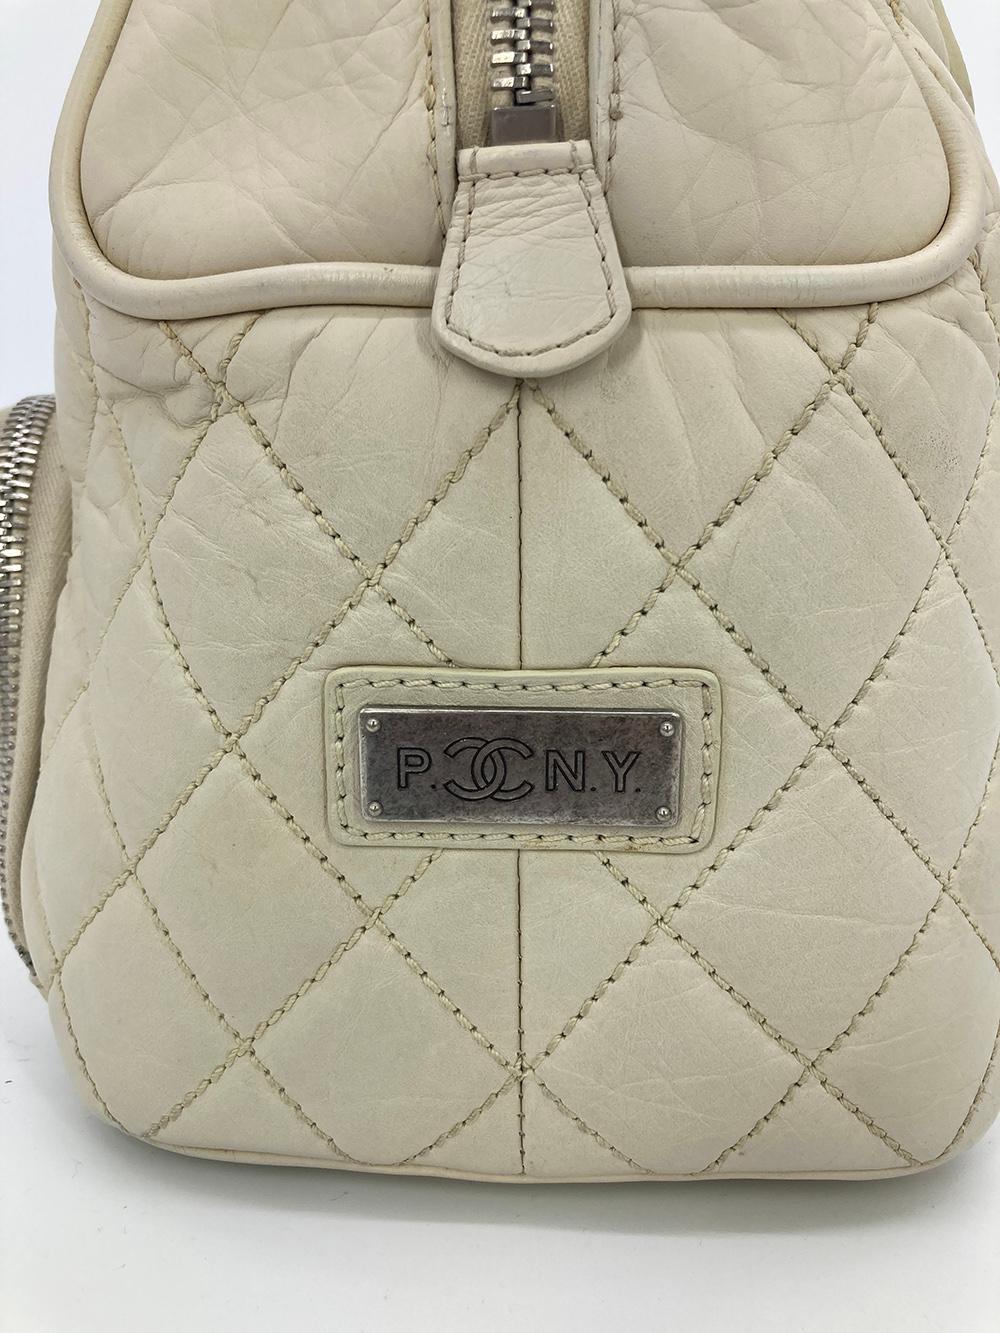 Women's Chanel Paris New York Cream Distressed Bowling Tote For Sale